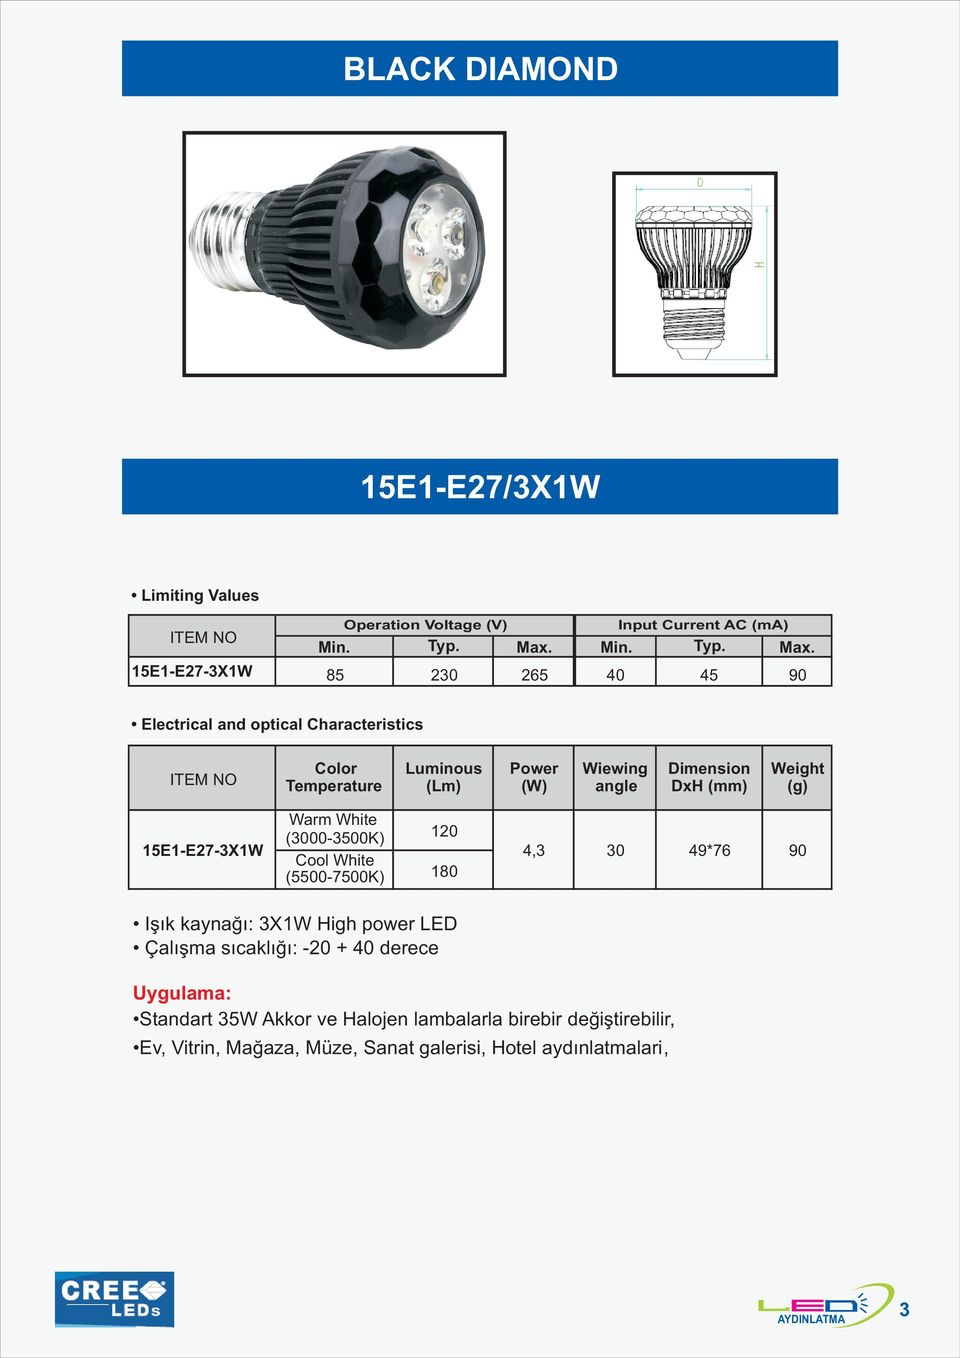 15E1-E27-3X1W 85 230 265 40 45 90 Electrical and optical Characteristics Color Temperature Luminous (Lm) Power (W) Wiewing angle